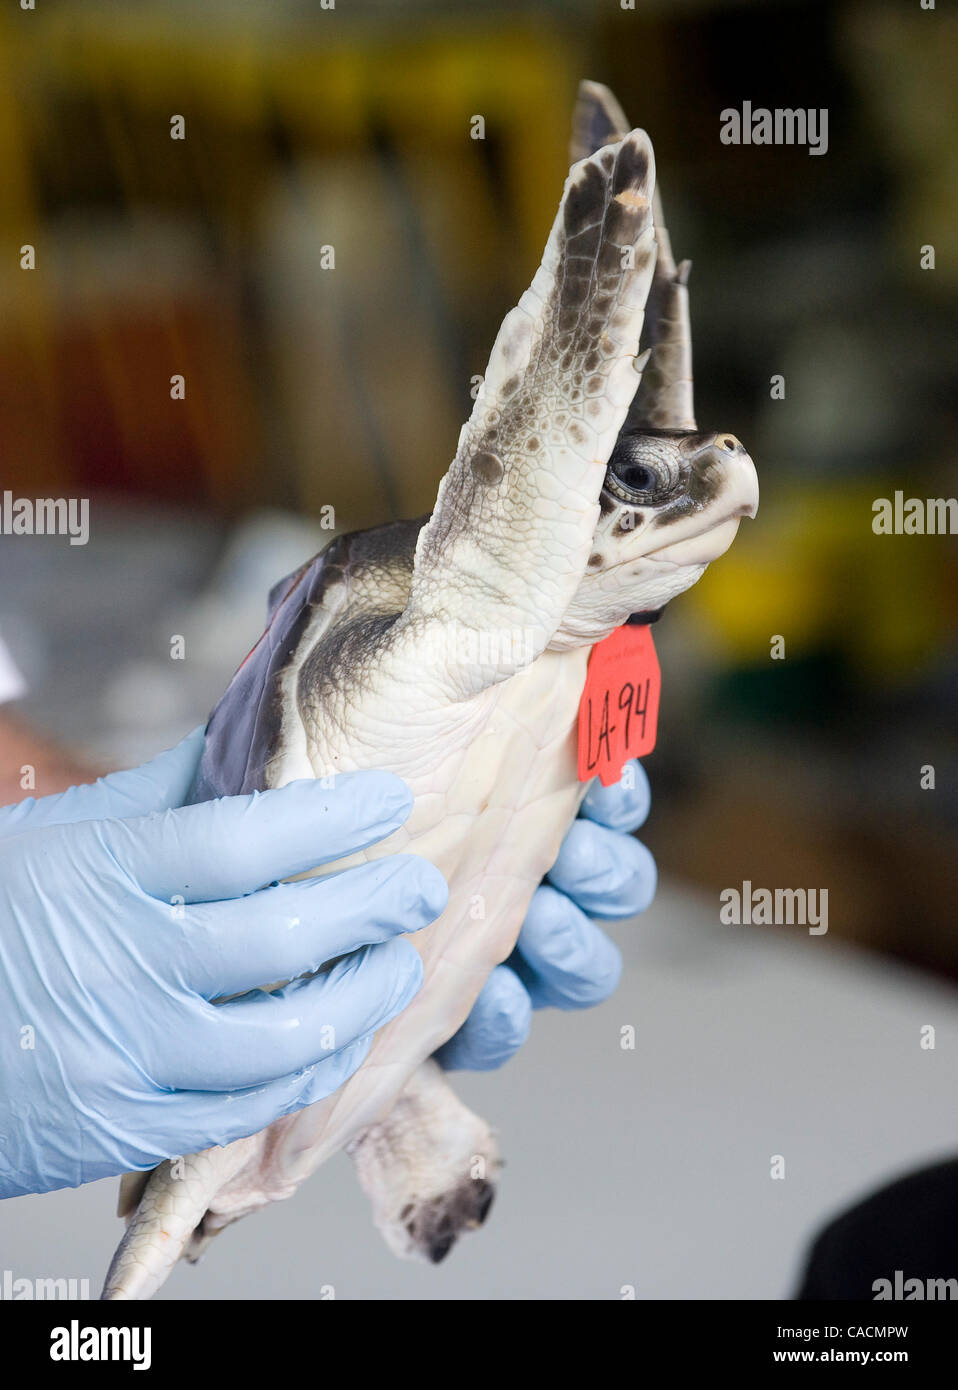 Jun. 10, 2010 - New Orleans, Louisiana, US - An endangered Kemps Ridley sea turtle, which was rescued after being found coated with oil from the Deepwater Horizon oil spill, is treated at the Audubon Nature InstituteÃ•s Center for Research of Endangered Species in New Orleans. Since the start of the Stock Photo